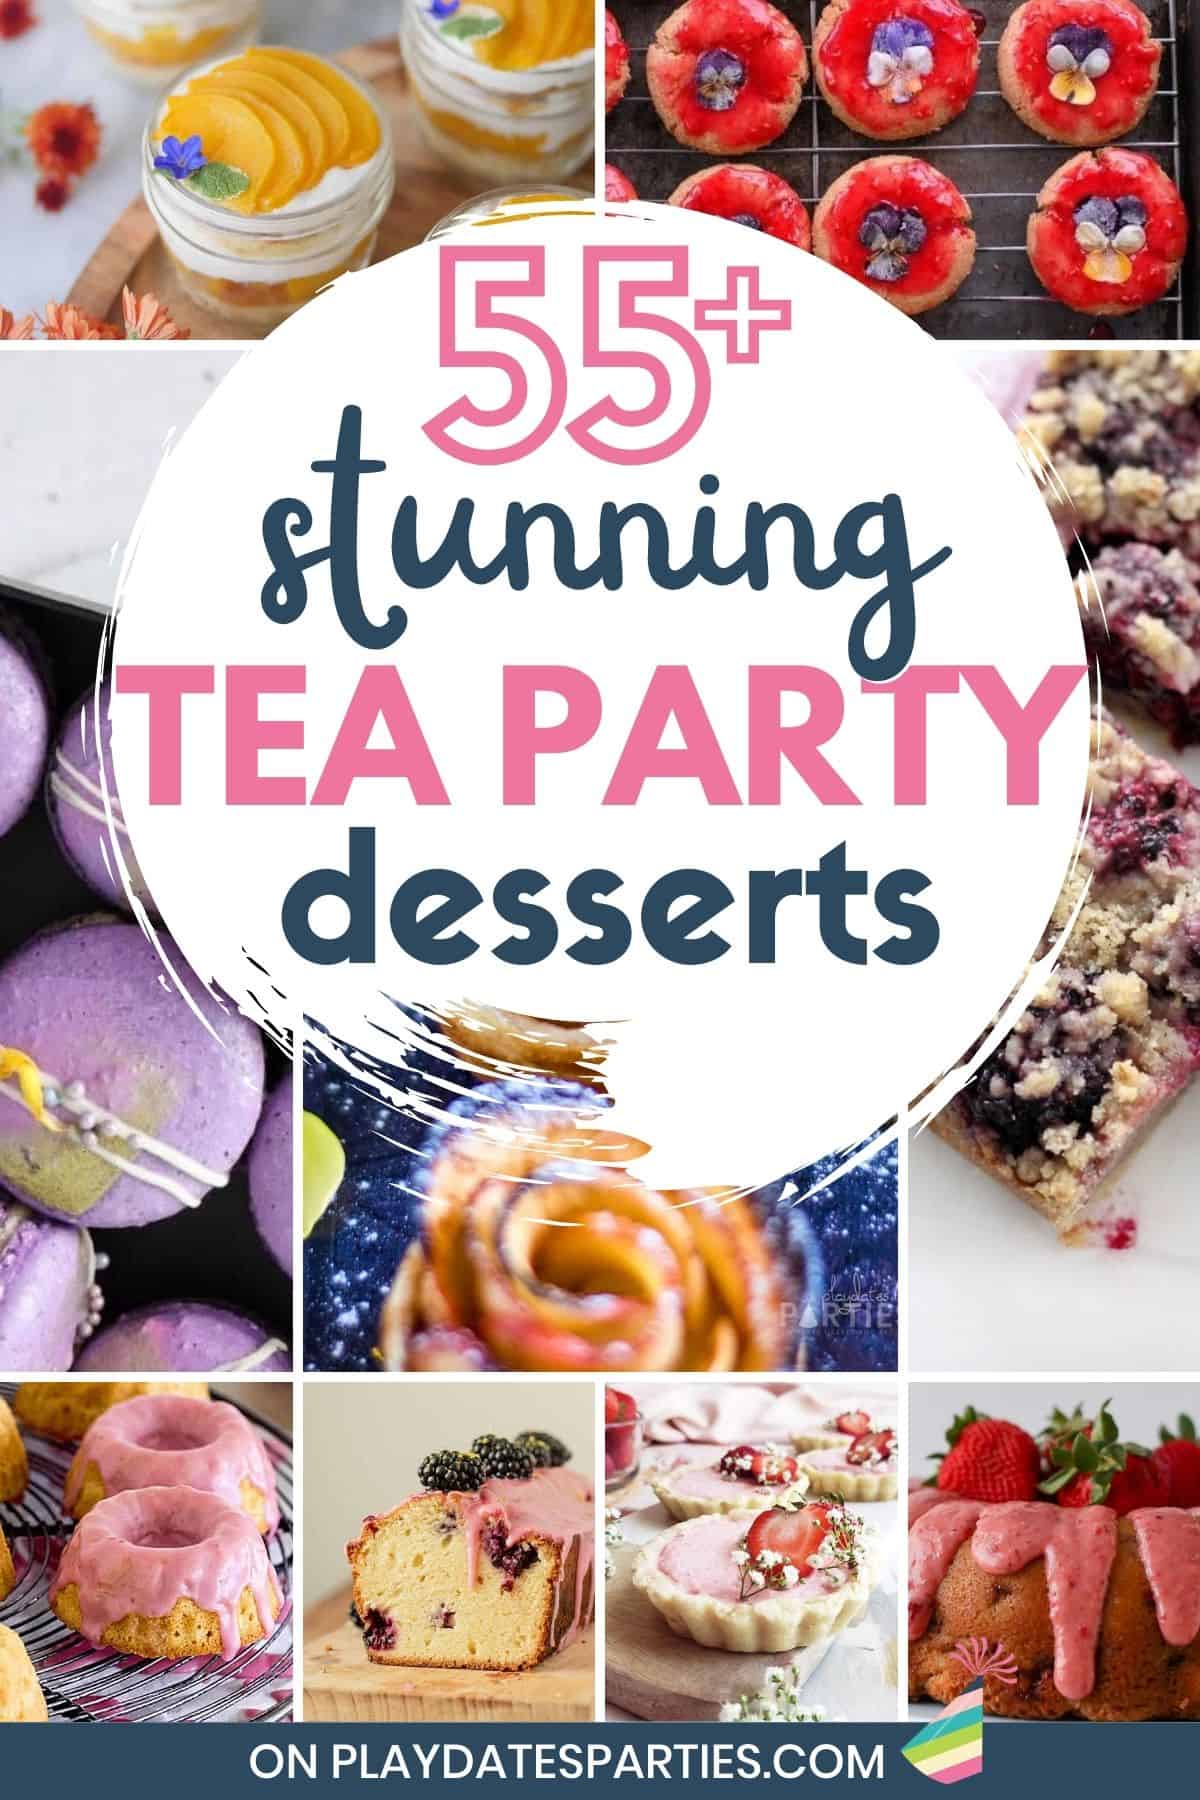 A collage of beautiful desserts with text overlay 55+ stunning tea party desserts.